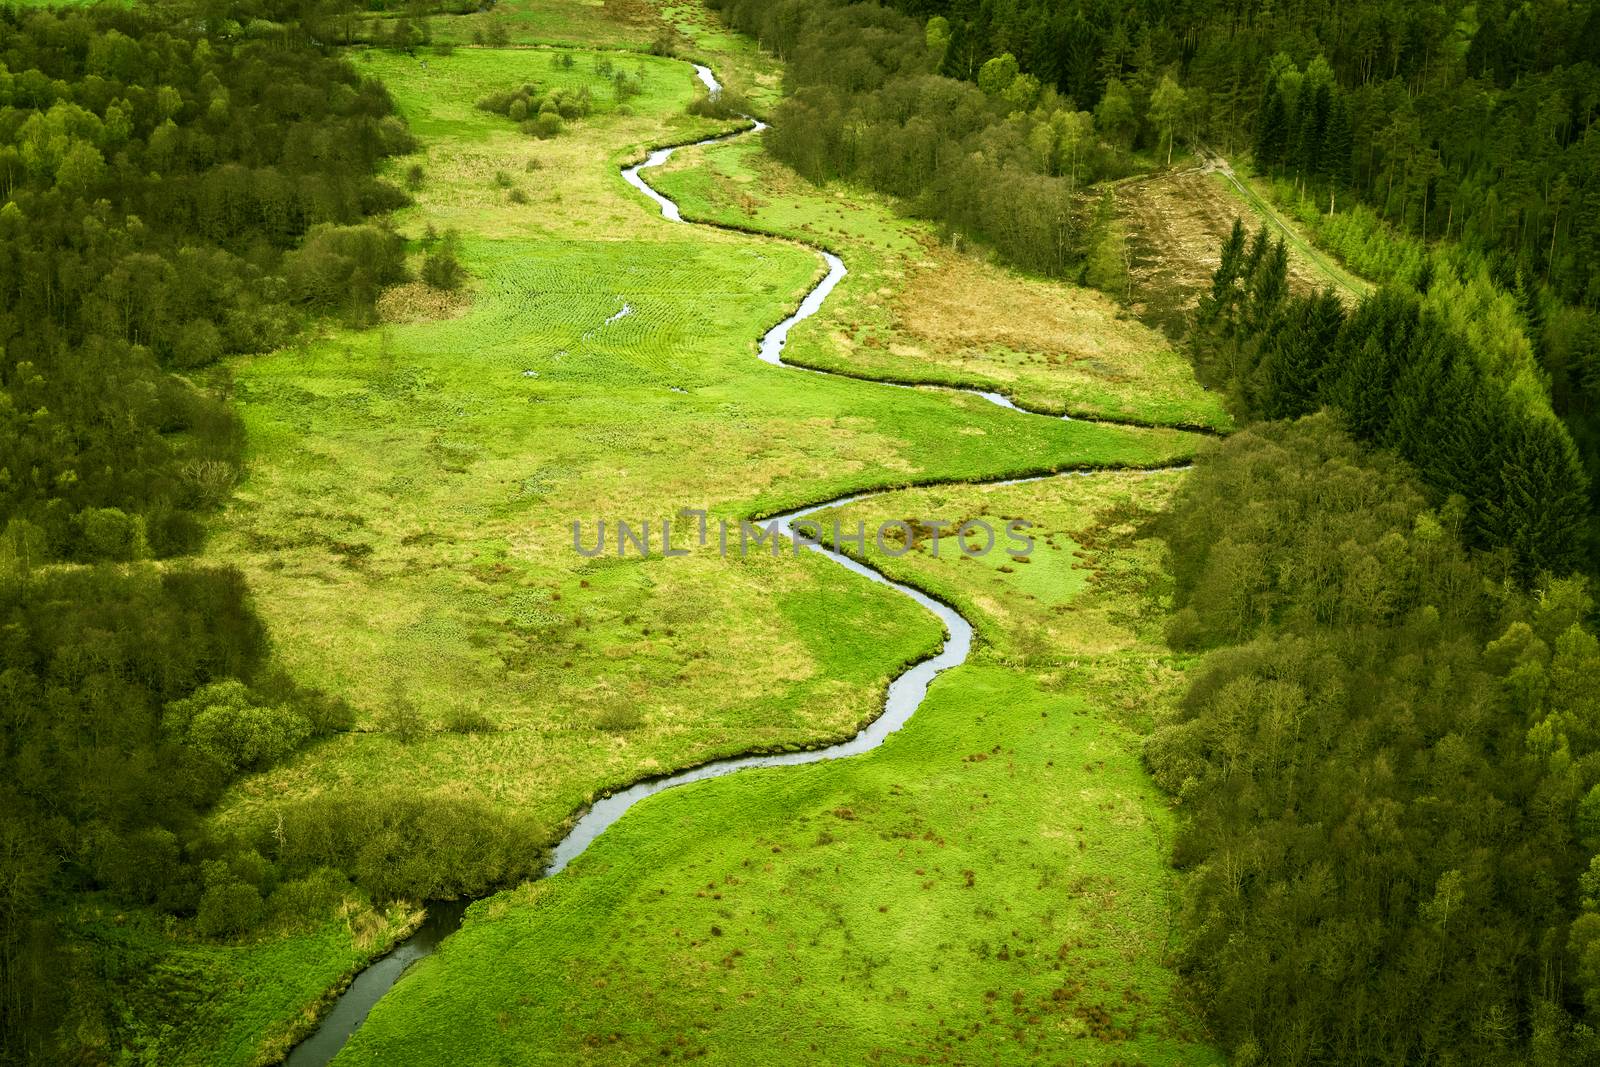 Curvy river running through a green area with fields and forest seen from above